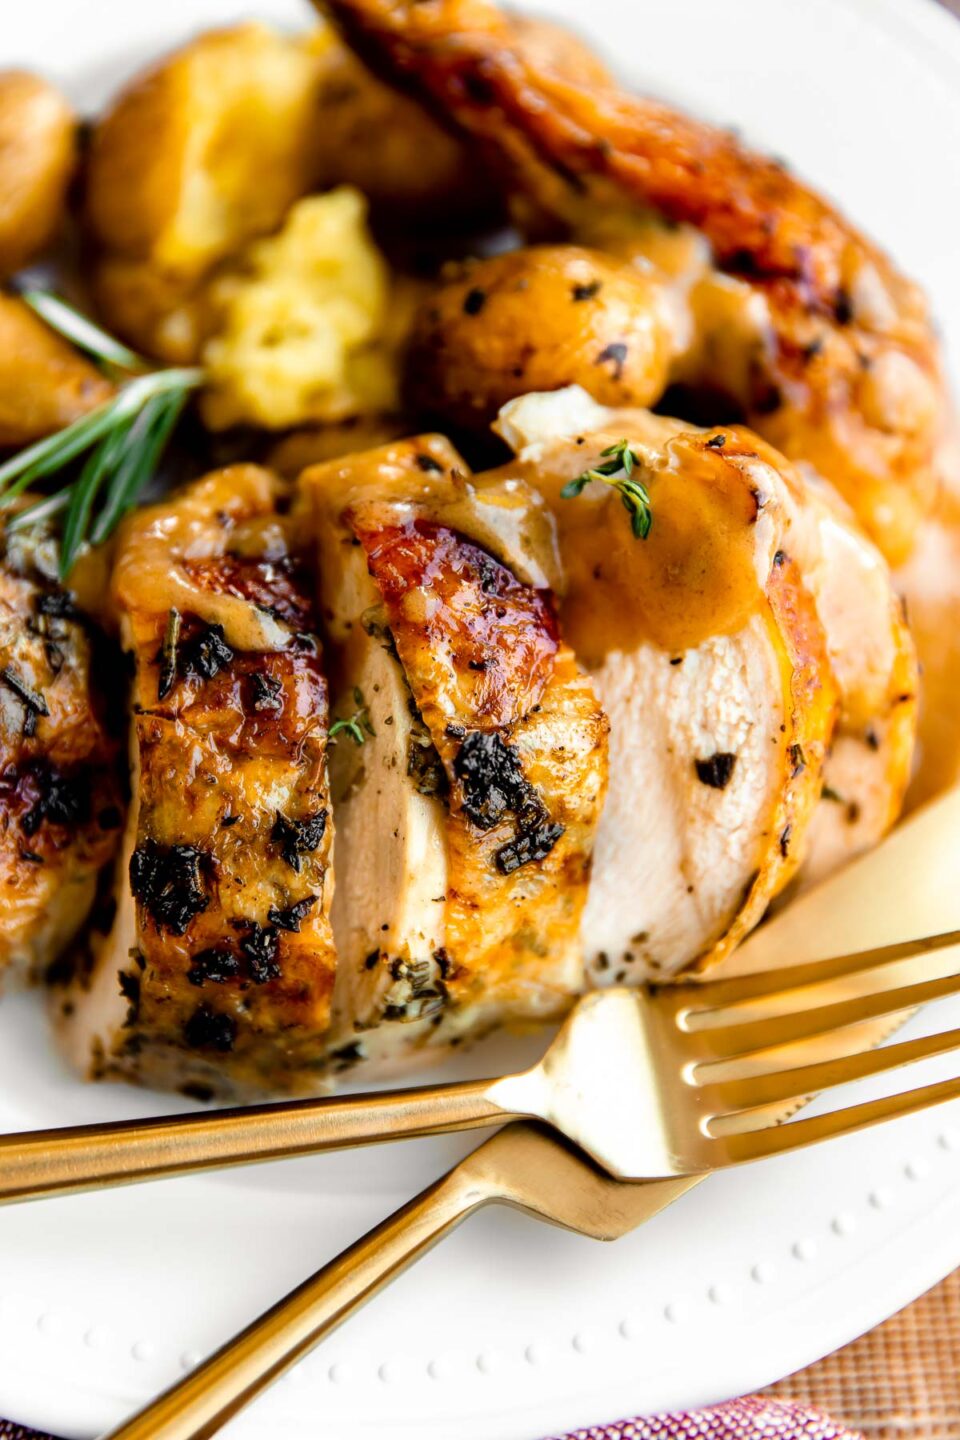 A close up of Thanksgiving chicken served on a white dinner plate with gold silverware. The oven roasted whol chicken has been served with potatoes, chicken gravy, and garnished with fresh herbs.